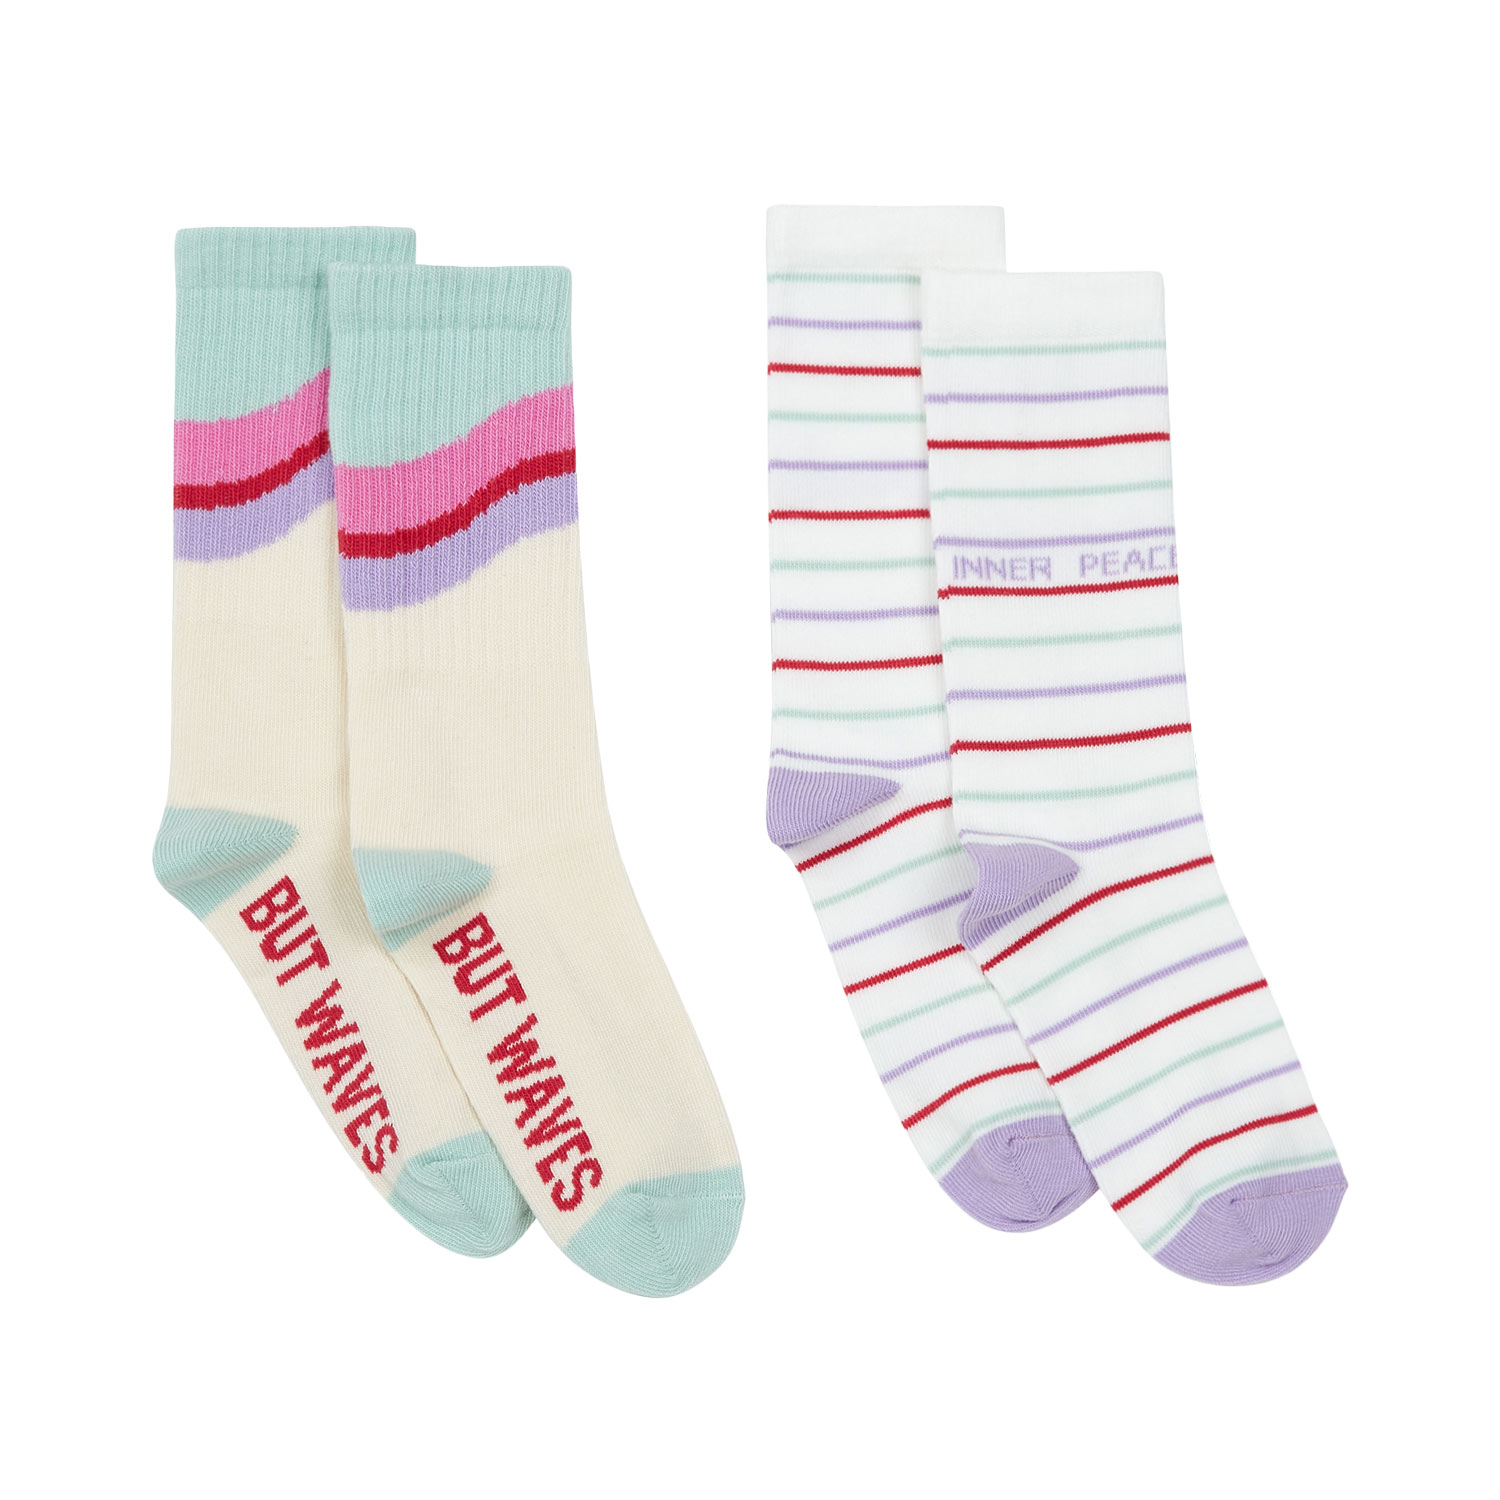 hundred pieces Waves Peace socks